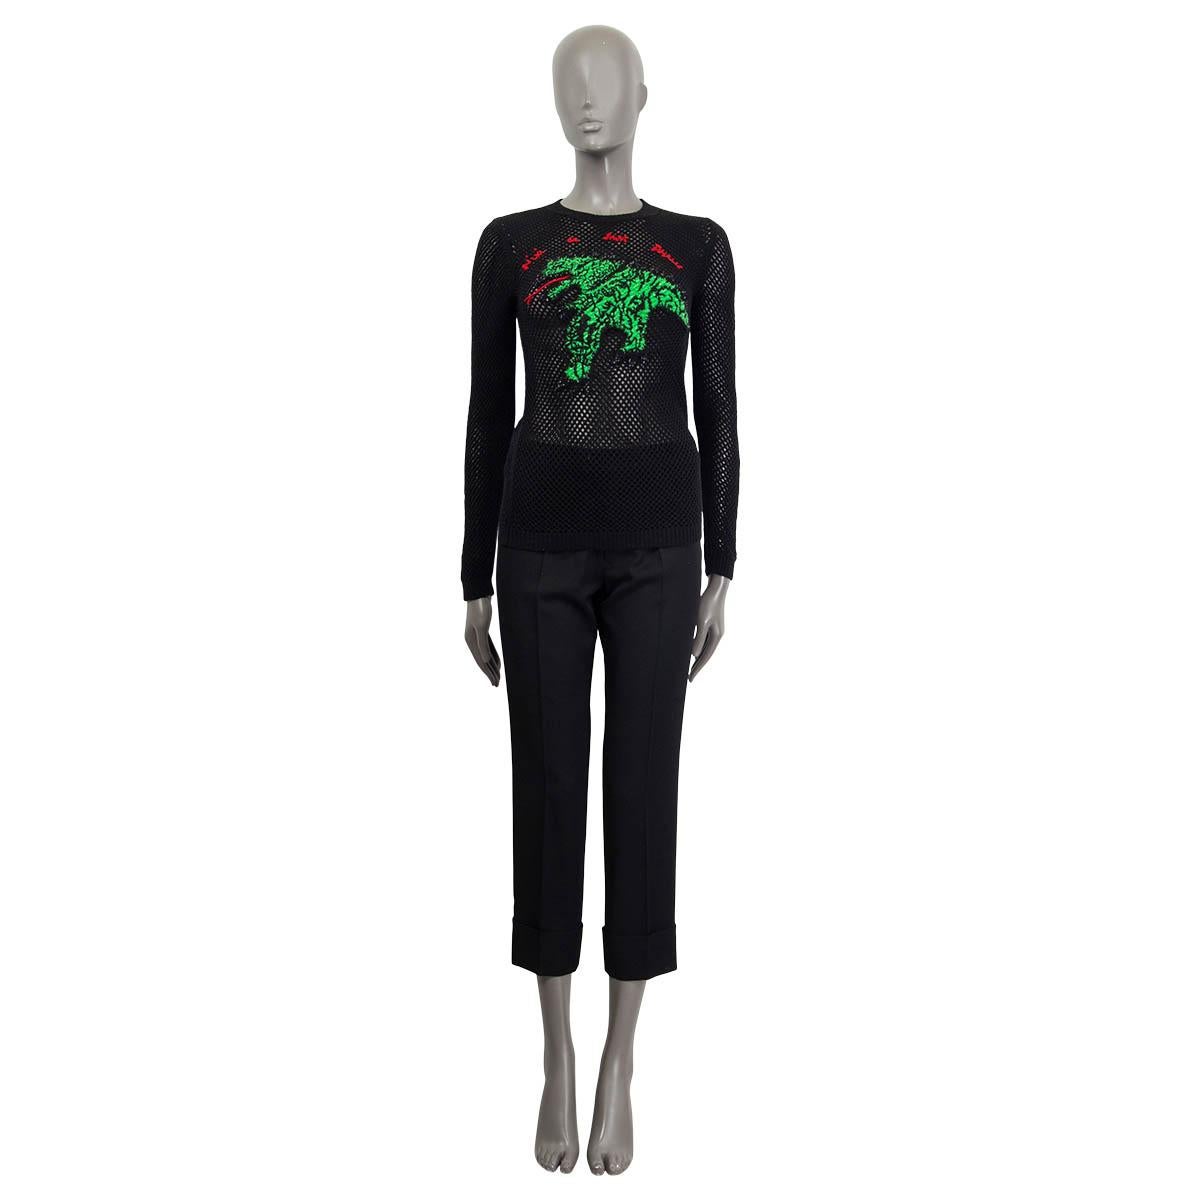 100% authentic Christian Dior 2018 'Niki de Saint Phalle' knit sweater in black cashmere (assumed cause tag is missing). Features a green dragon embroidery on the front and long sleeves. Unlined. Has been worn once and is in virtually new condition.